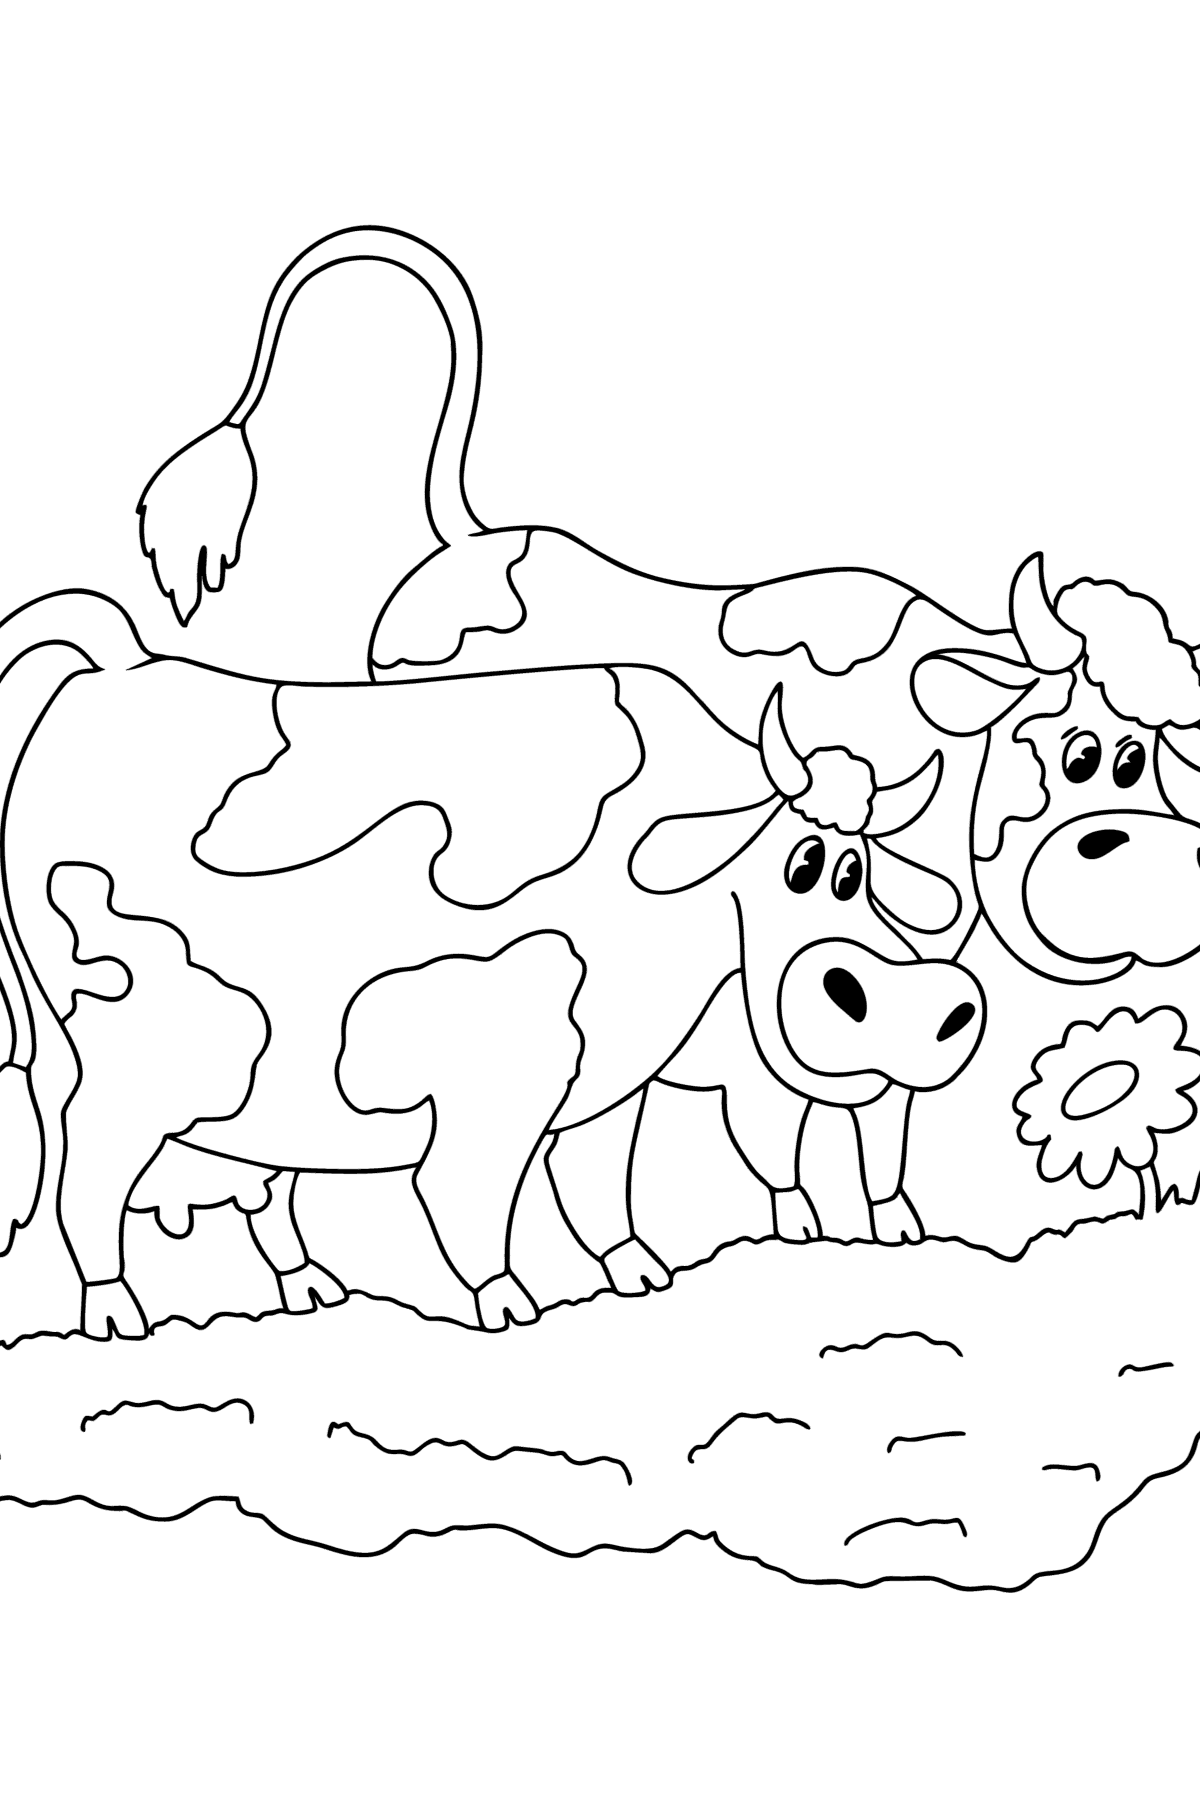 Two cows in the meadow Coloring page - Coloring Pages for Kids